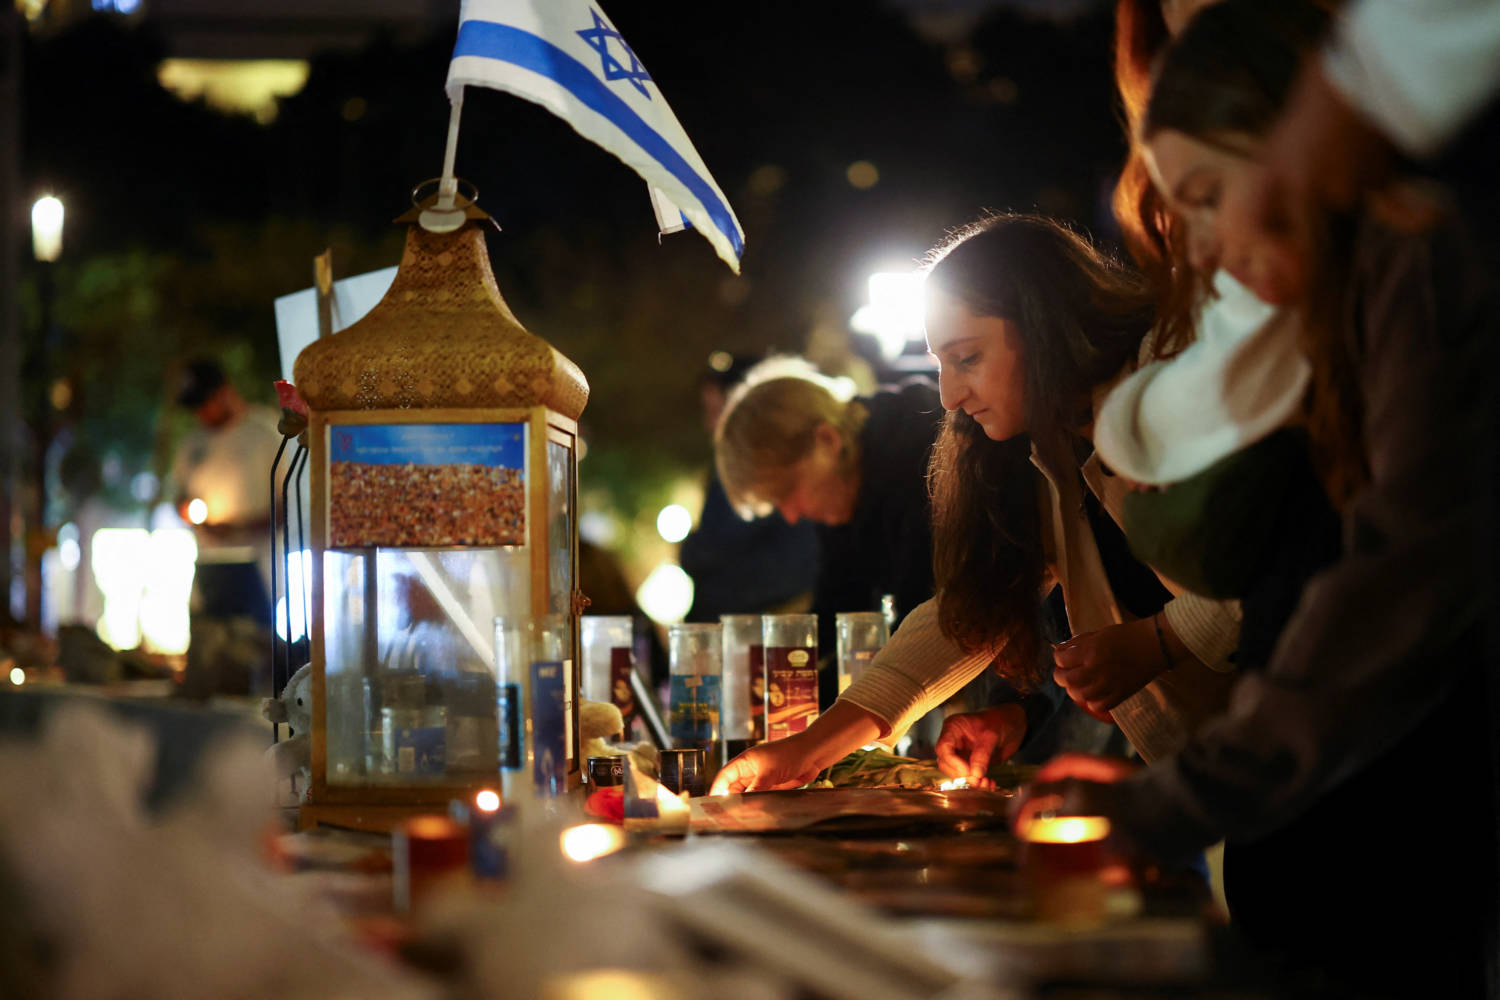 A Woman Lights A Candle Next To Memorabilia And Pictures Of The Hostages Kidnapped In The Deadly October 7 Attack On Israel By The Palestinian Islamist Group Hamas From Gaza, At Dizengoff Square In Tel Aviv